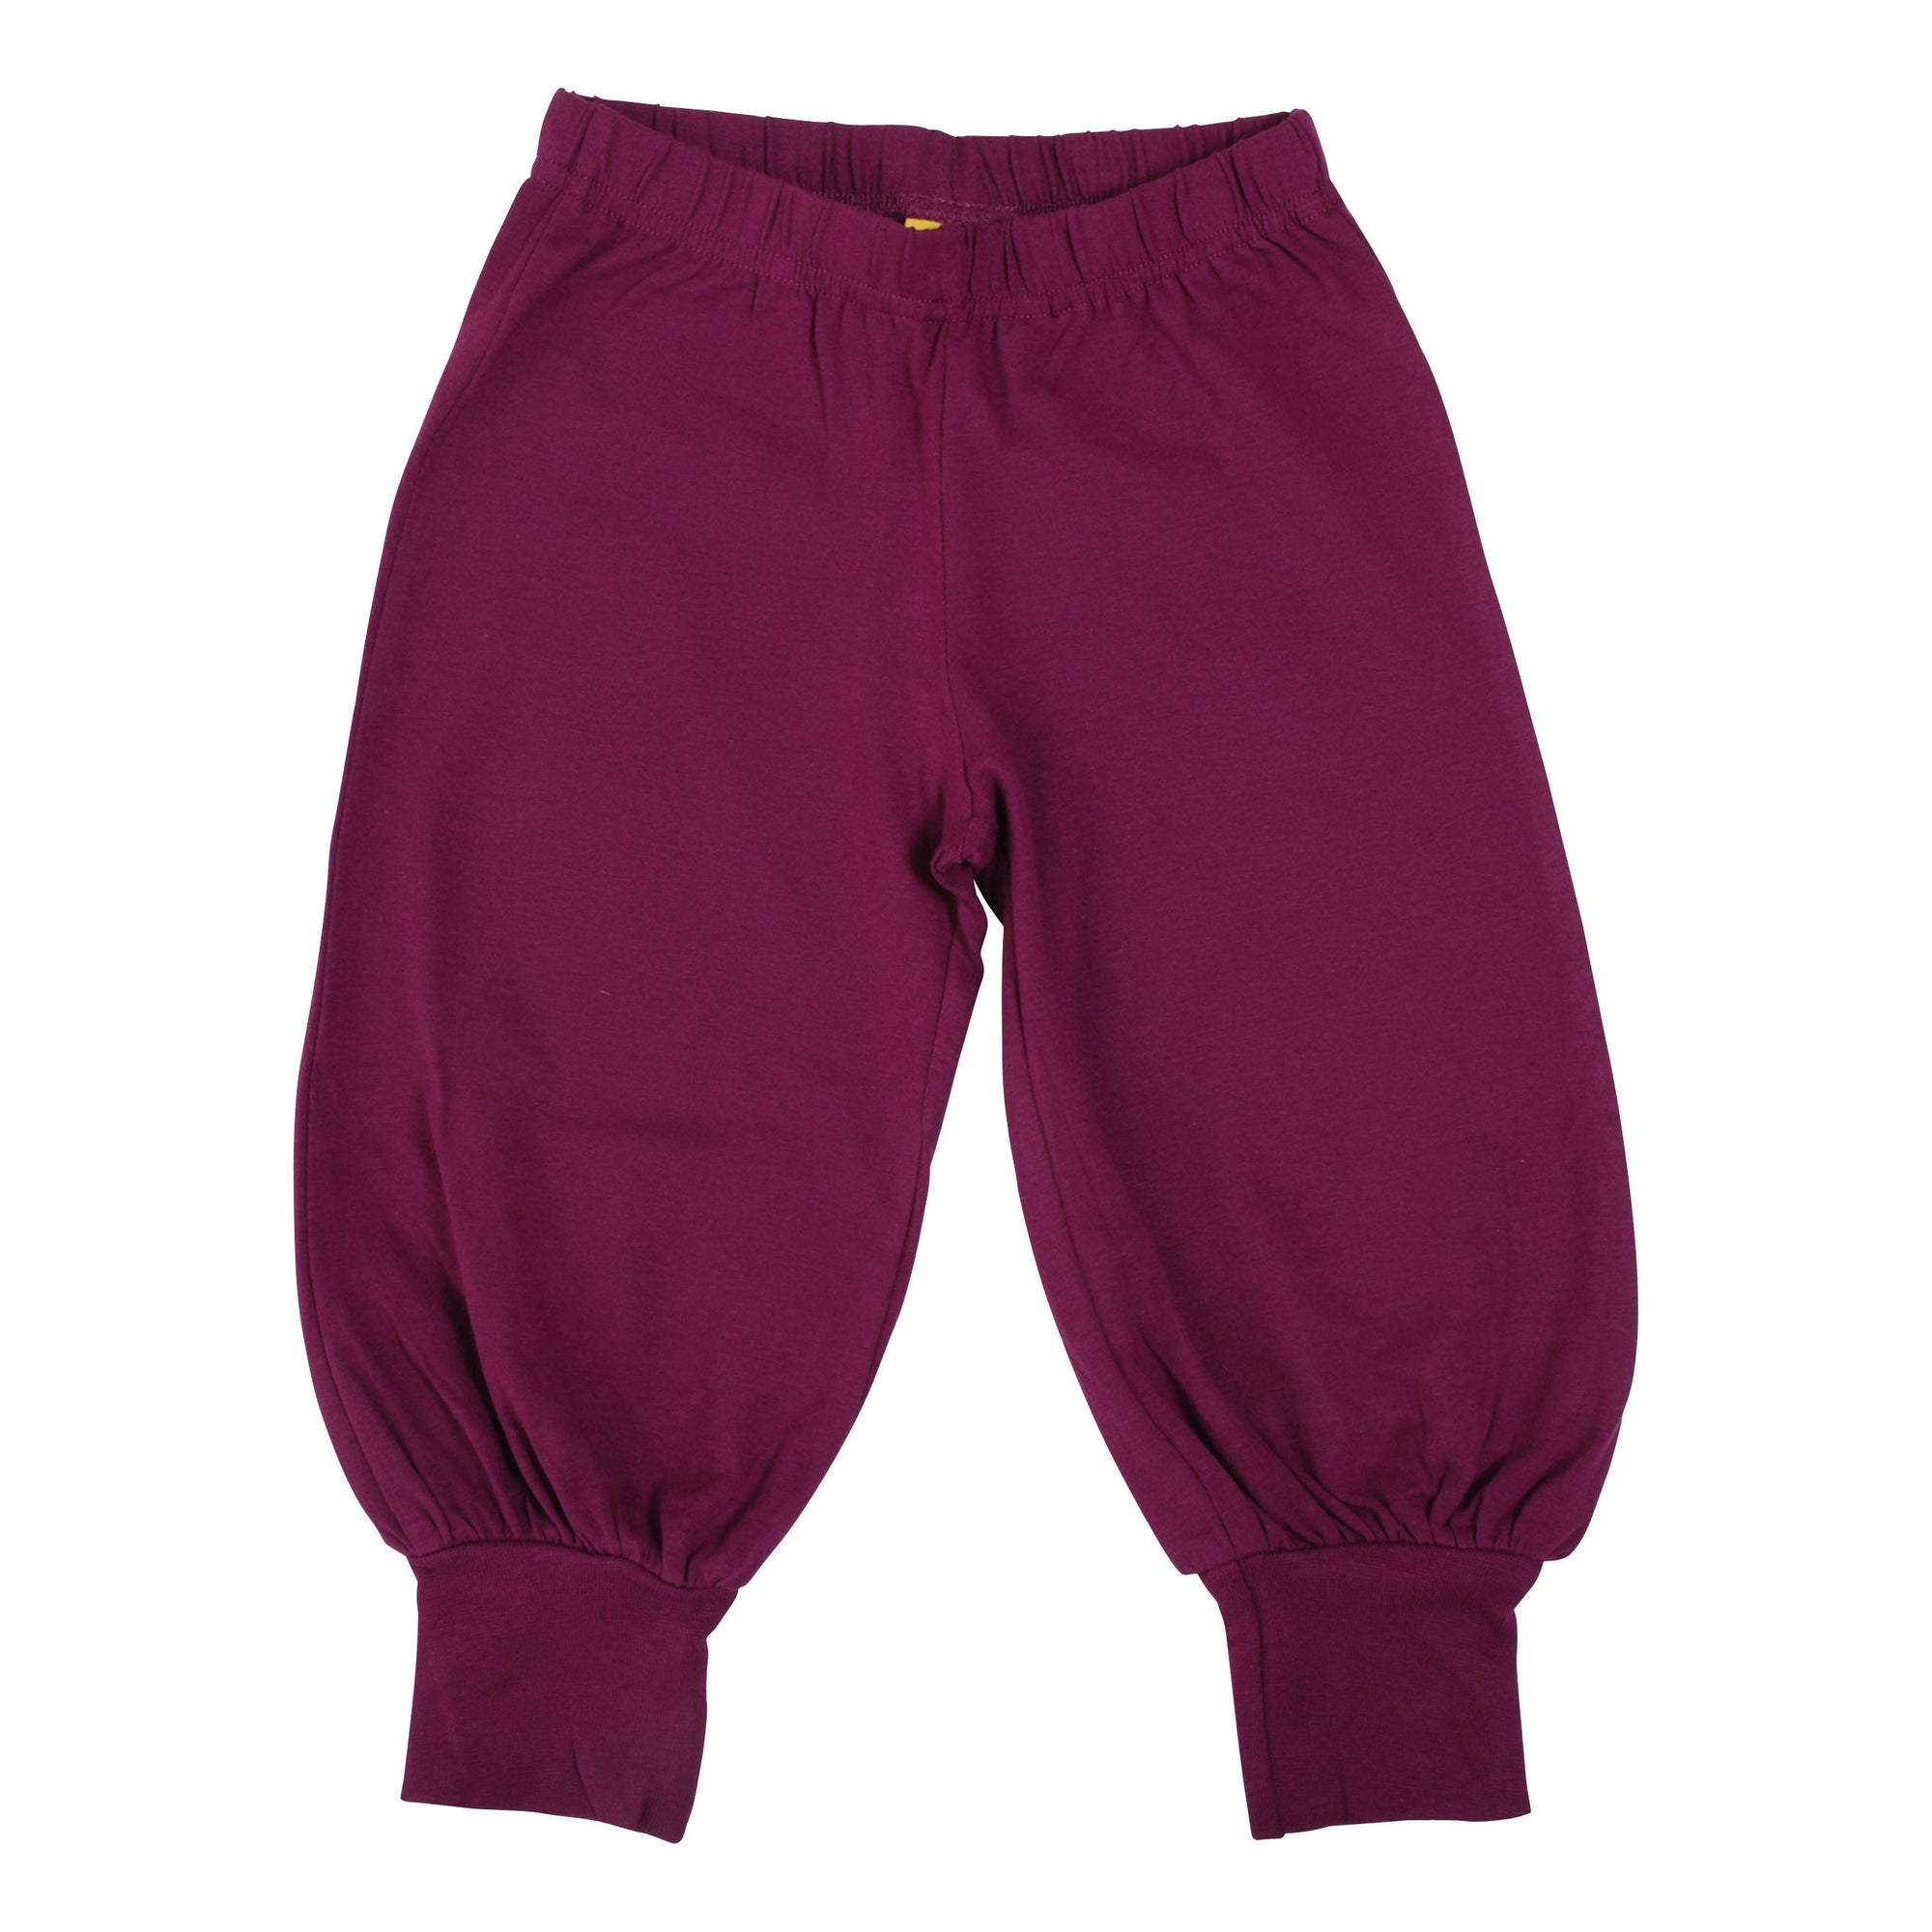 Phlox Baggy Pants - 2 Left Size 12-14 years-More Than A Fling-Modern Rascals